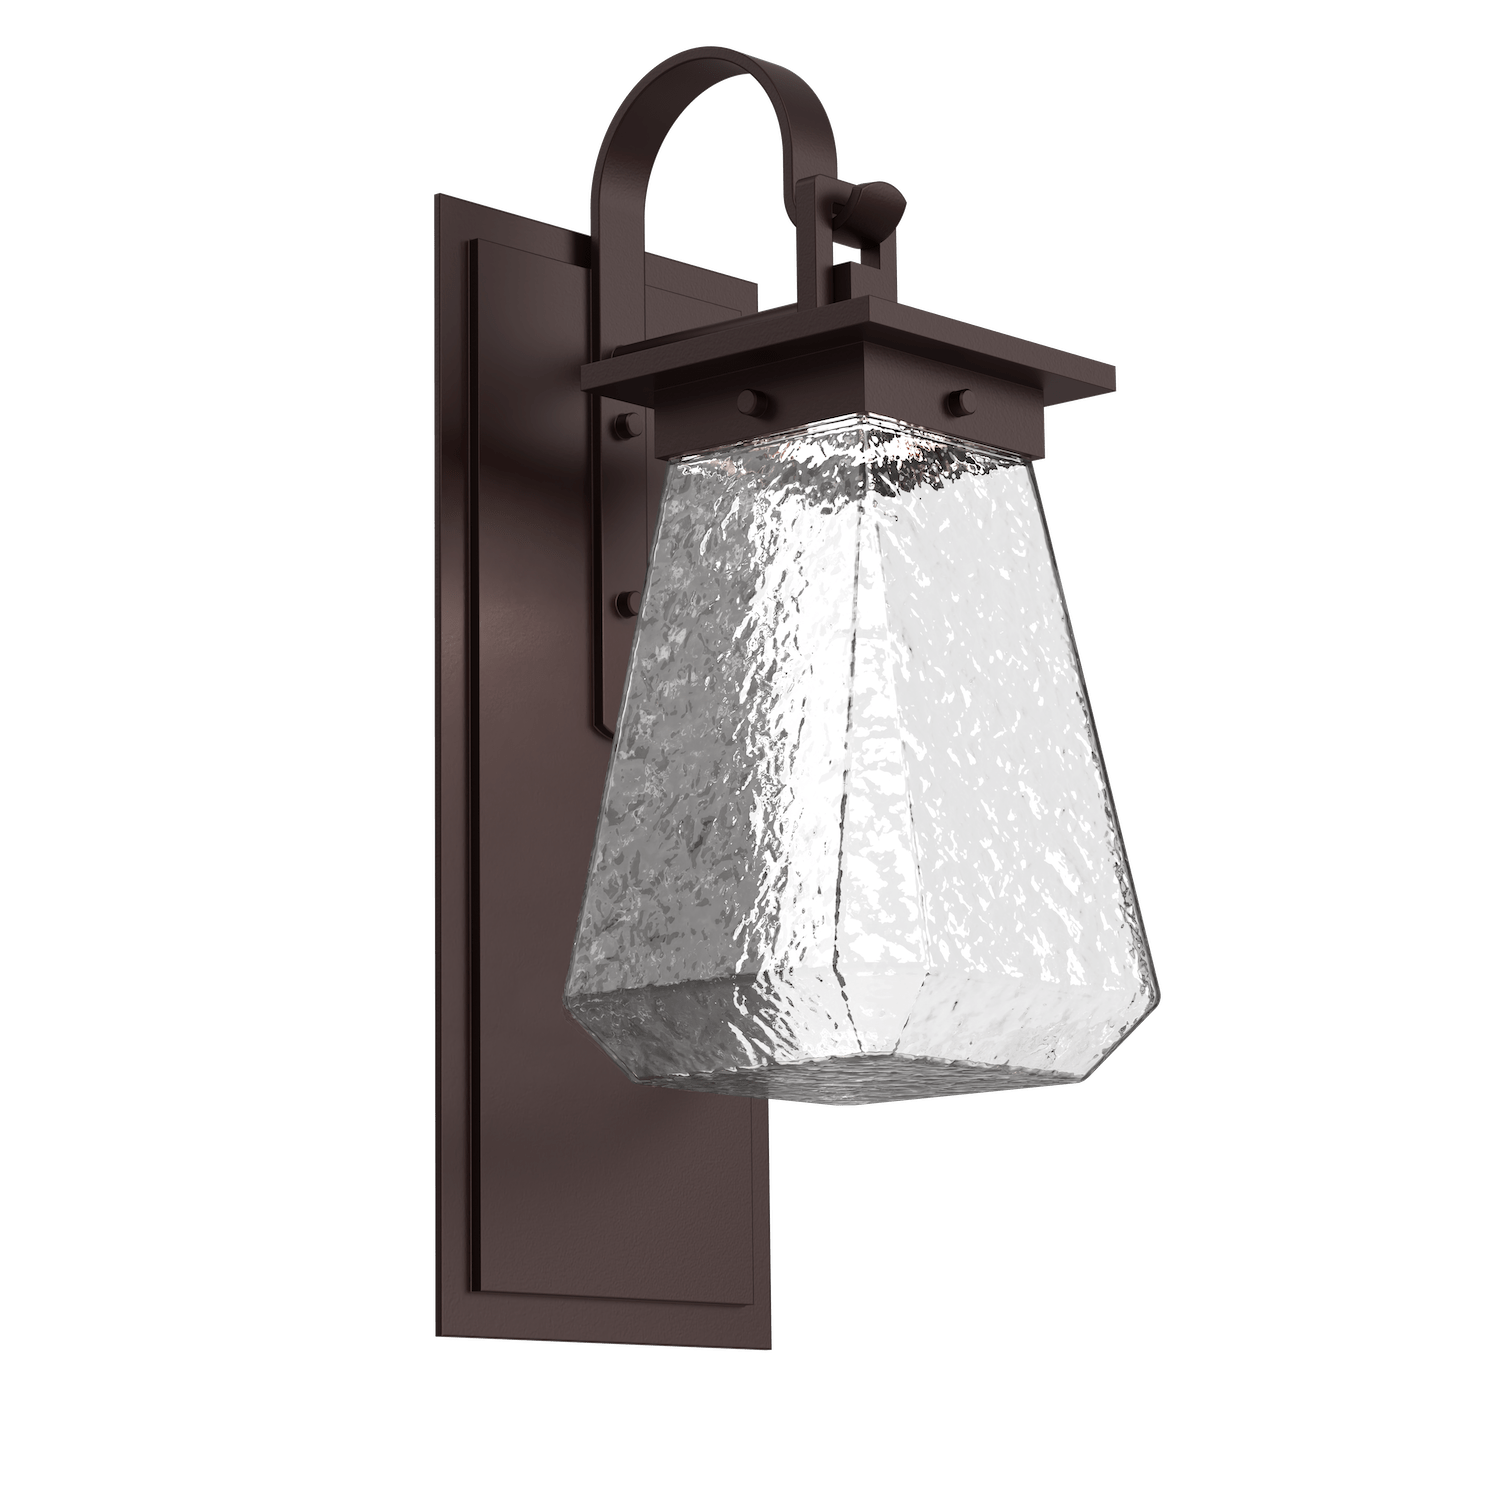 ODB0043-AC-SB-C-Hammerton-Studio-Beacon-18-inch-outdoor-sconce-with-shepherds-hook-with-statuary-bronze-finish-and-clear-blown-glass-shades-and-LED-lamping